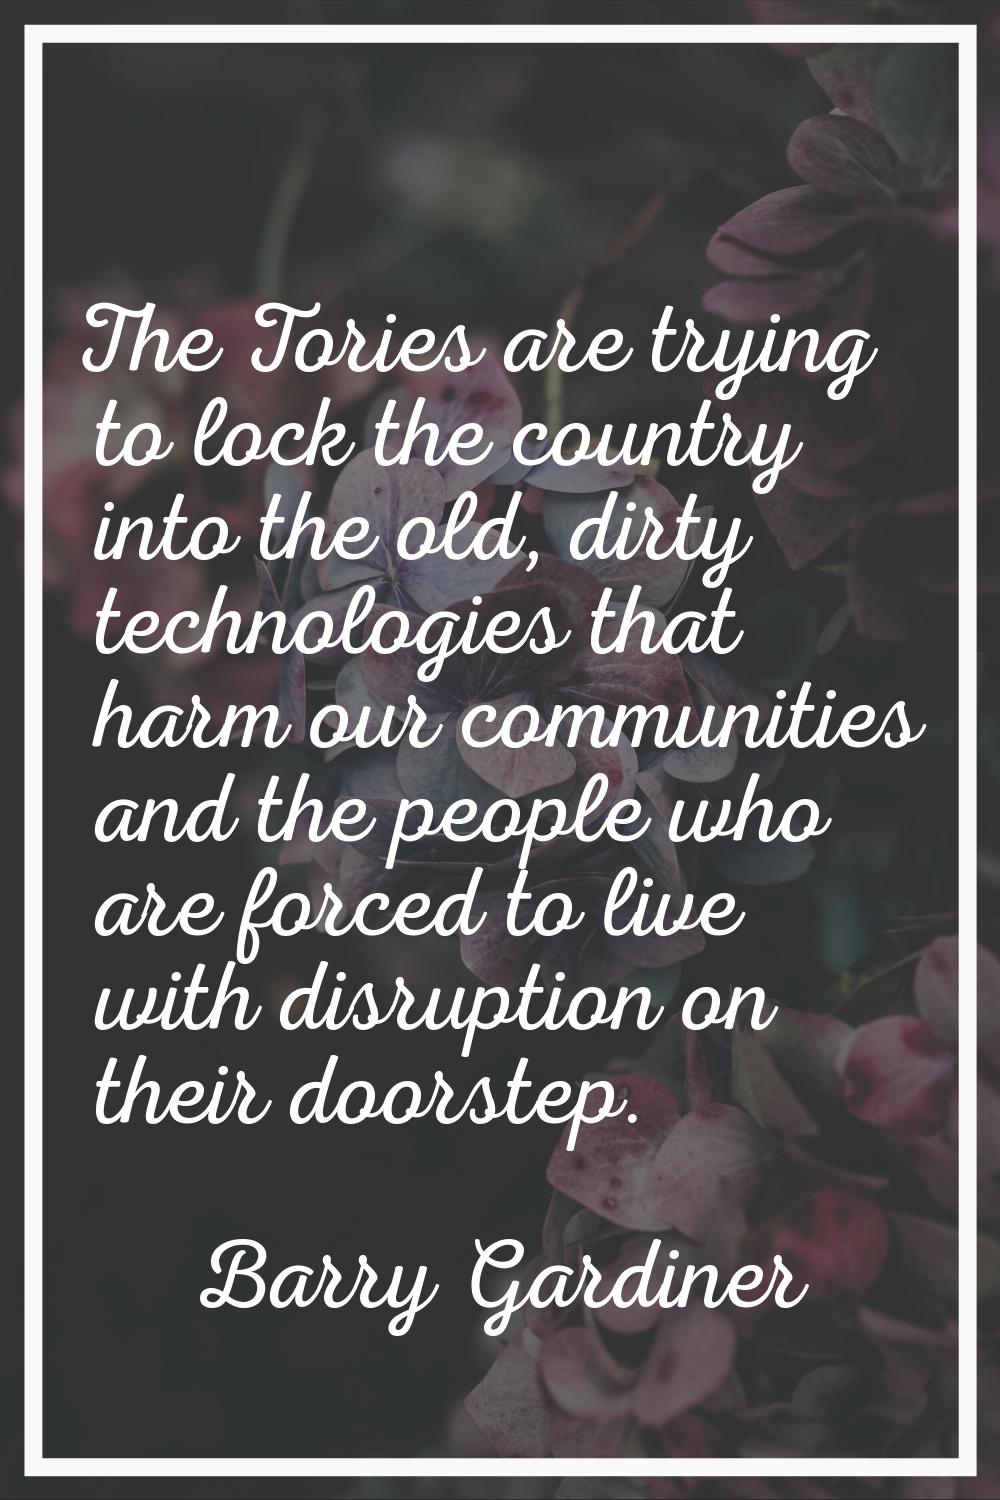 The Tories are trying to lock the country into the old, dirty technologies that harm our communitie